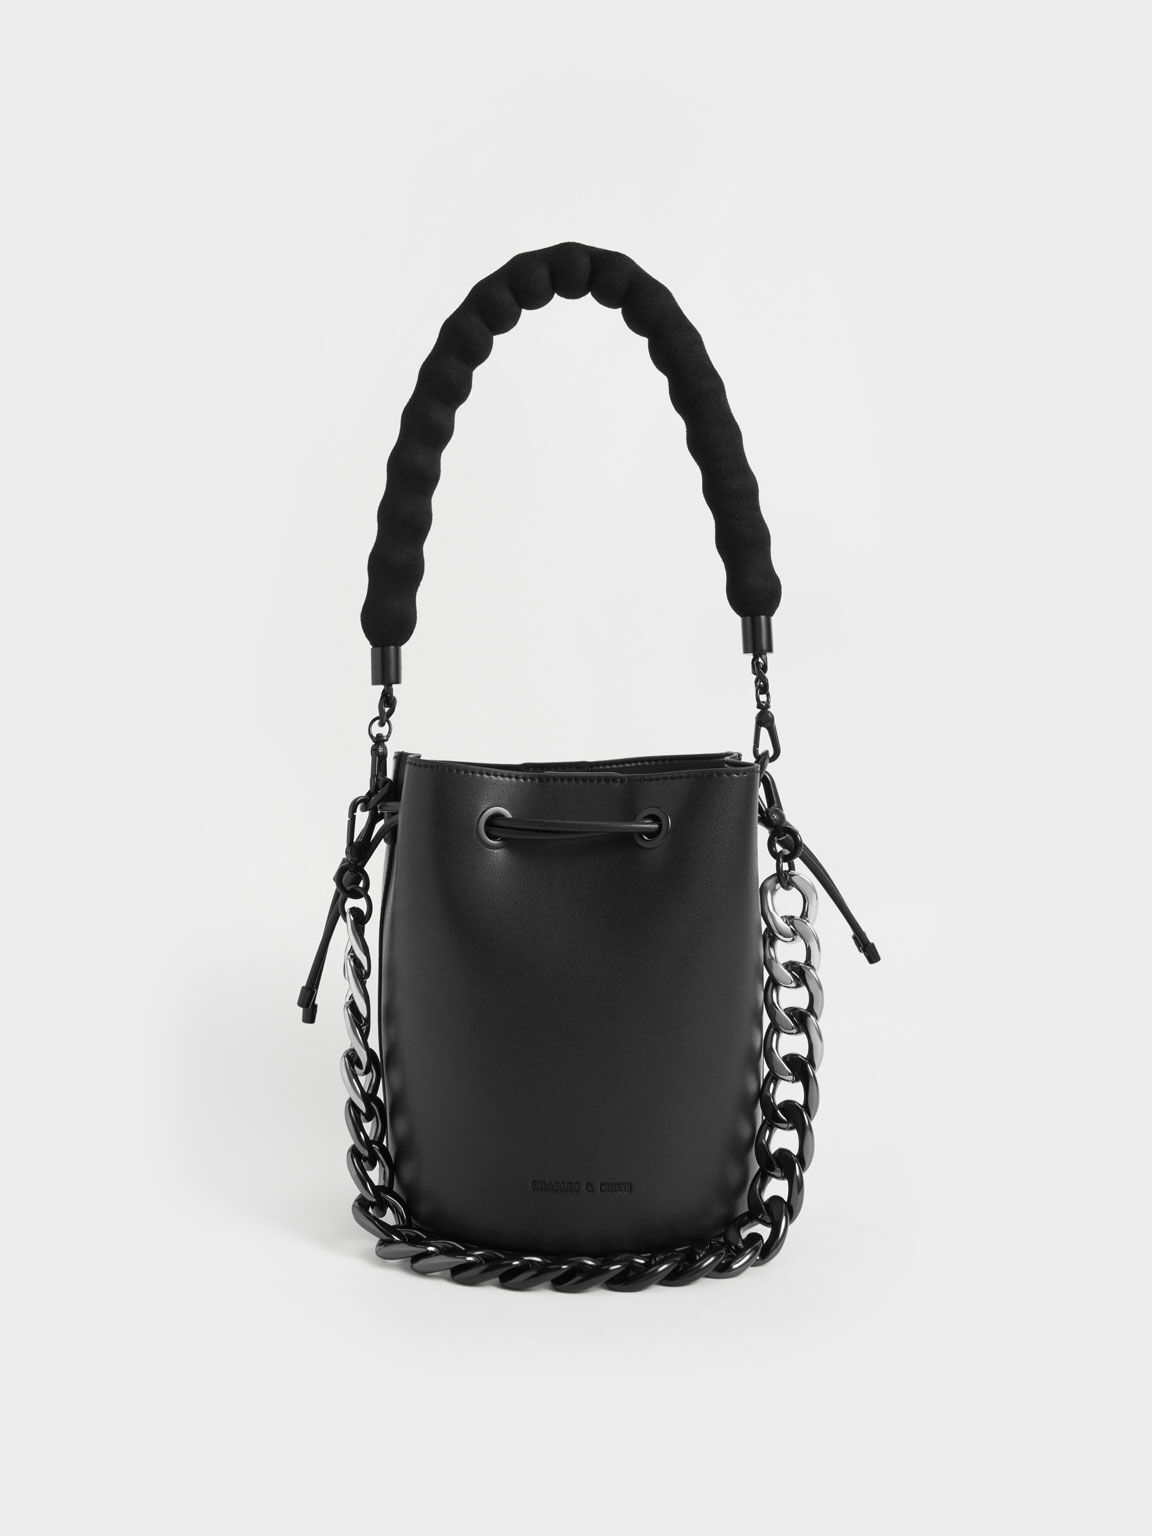 Women's Handbags | Exclusive Styles - CHARLES & KEITH TH